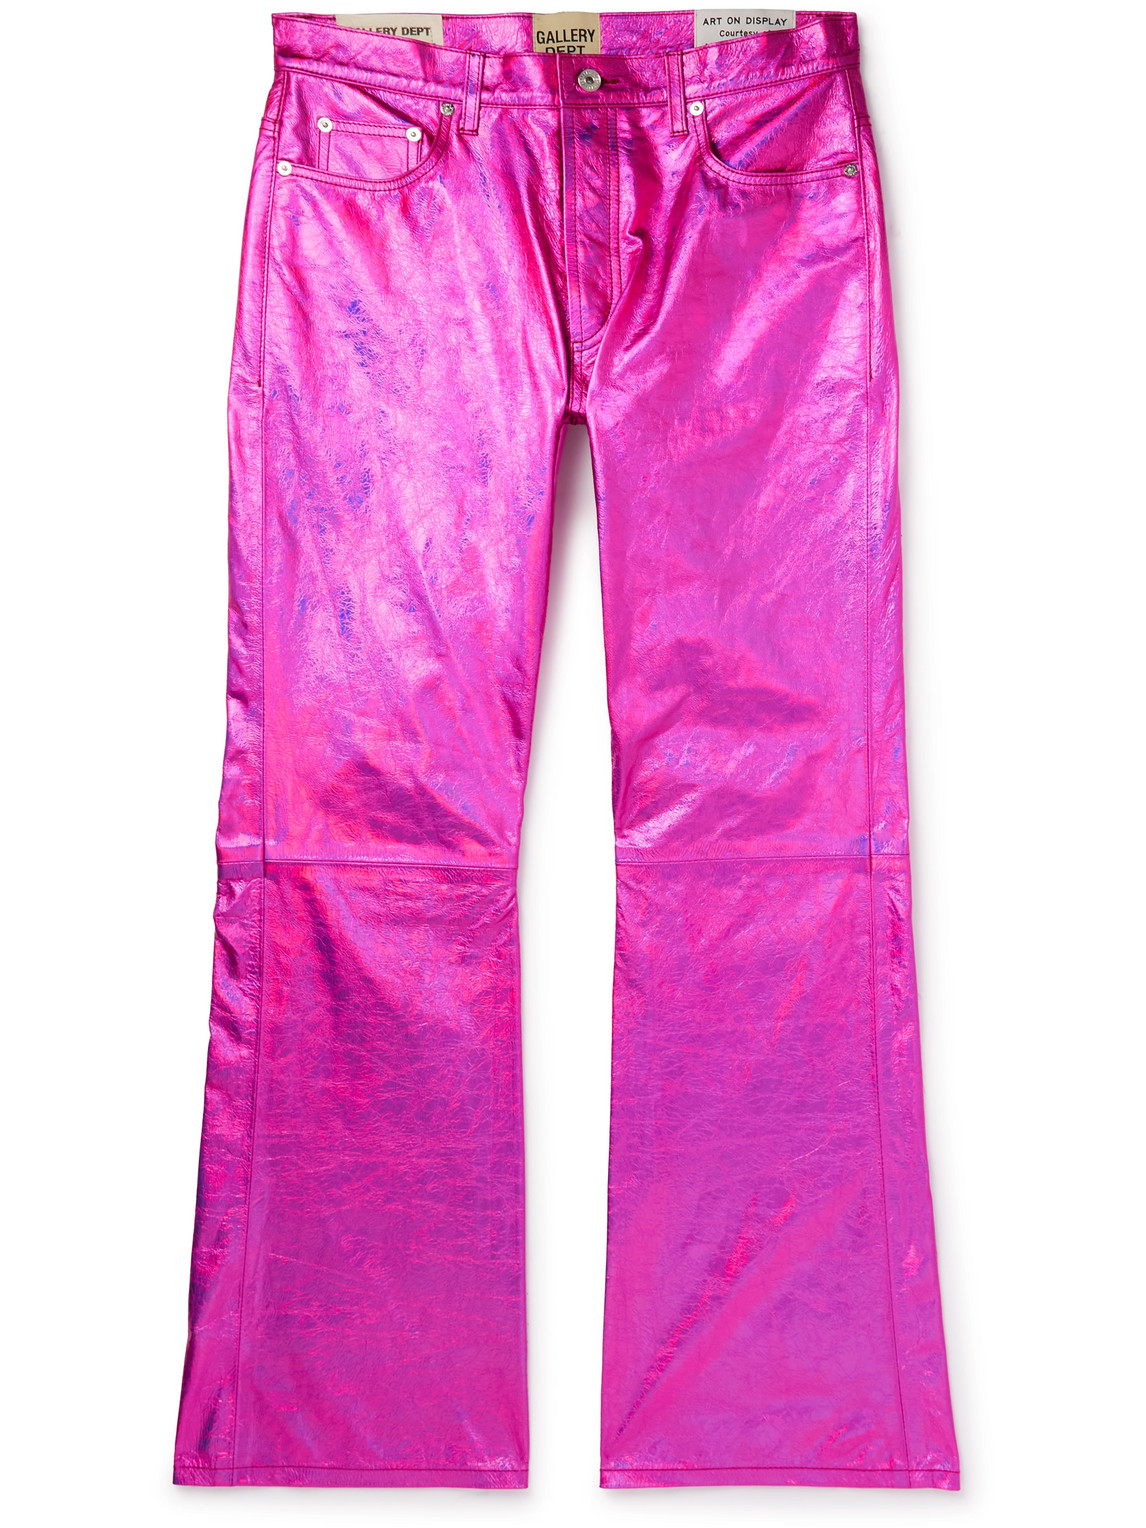 Logan Galactic Flared Distressed Metallic Crinkled-Leather Trousers